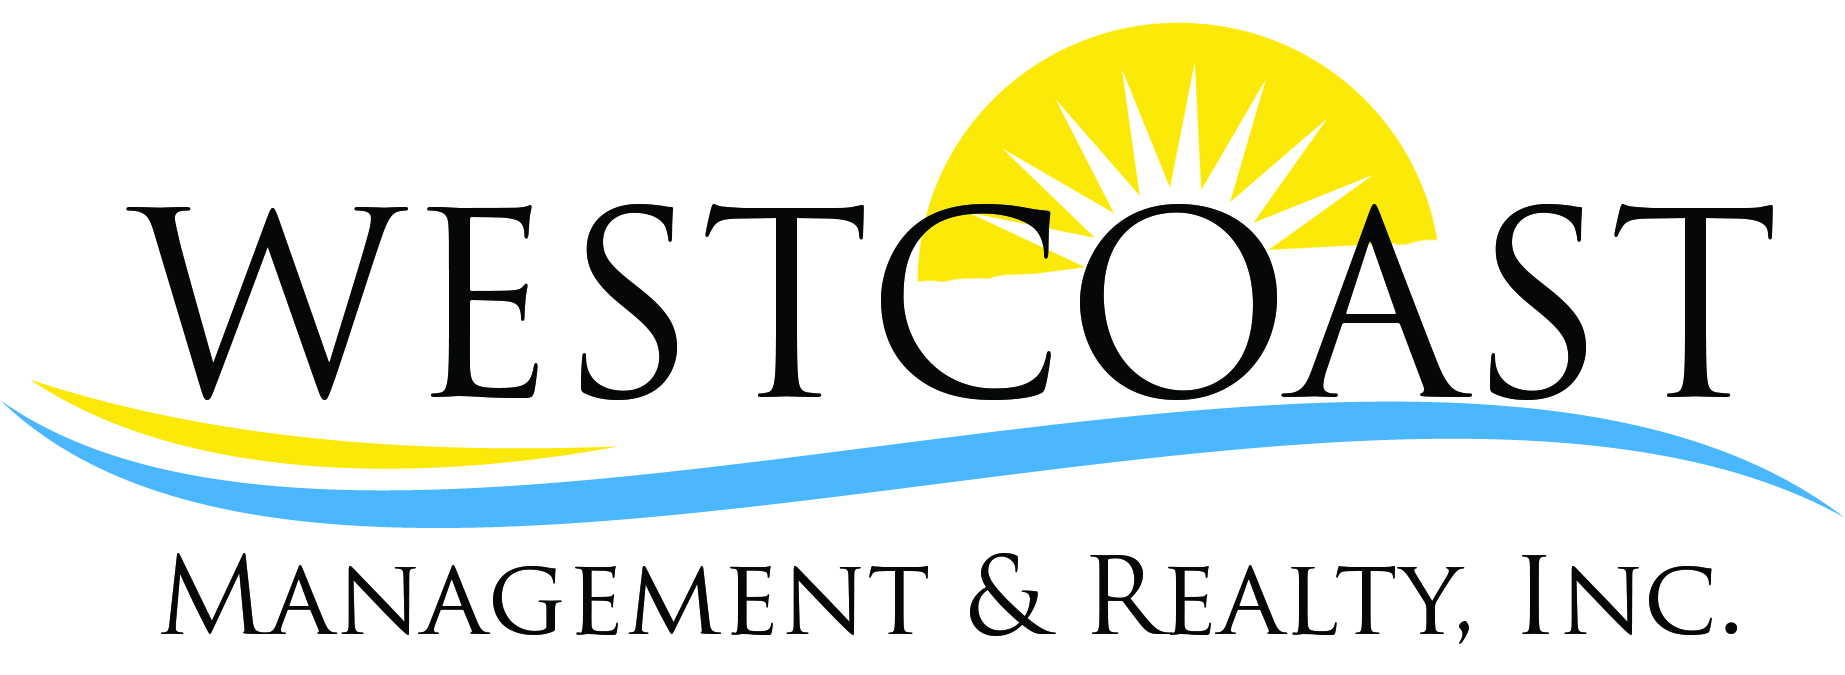 Westcoast Management and Realty, Inc. - Associations logo